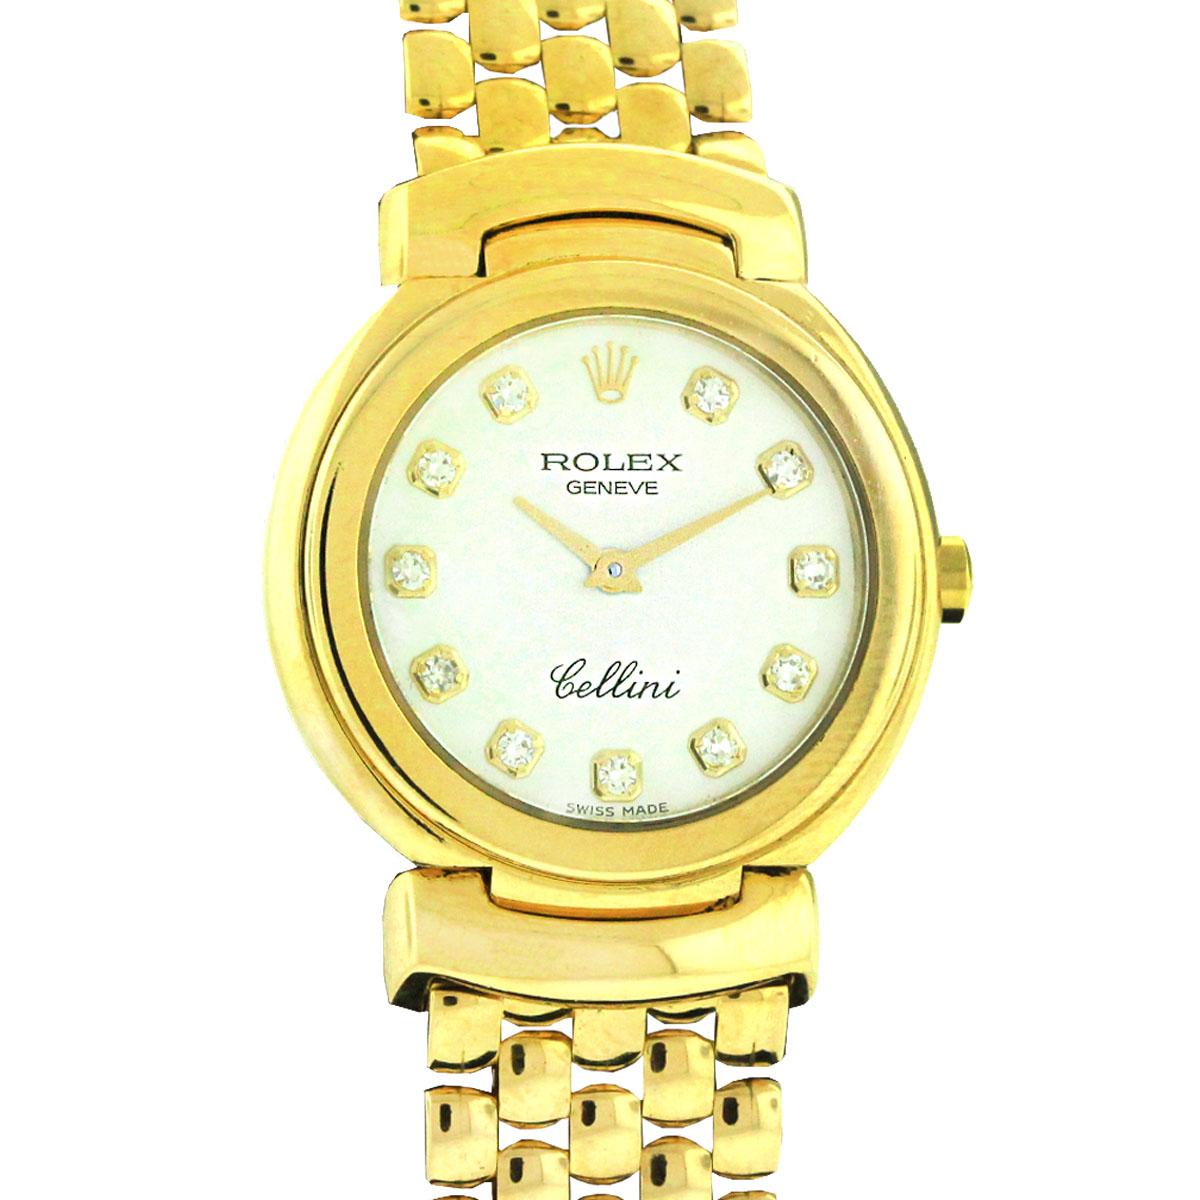 Brand-Rolex
MPN-6621
Model-Cellini
Case Material-18k Yellow Gold
Case Diameter-26mm
Bezel-18k Yellow Gold , Smooth Bezel
Dial-White Diamond Dial
Bracelet-18k Yellow Gold , mesh bracelet
Crystal-Sapphire crystal
Size-Will fit up to a 5.50